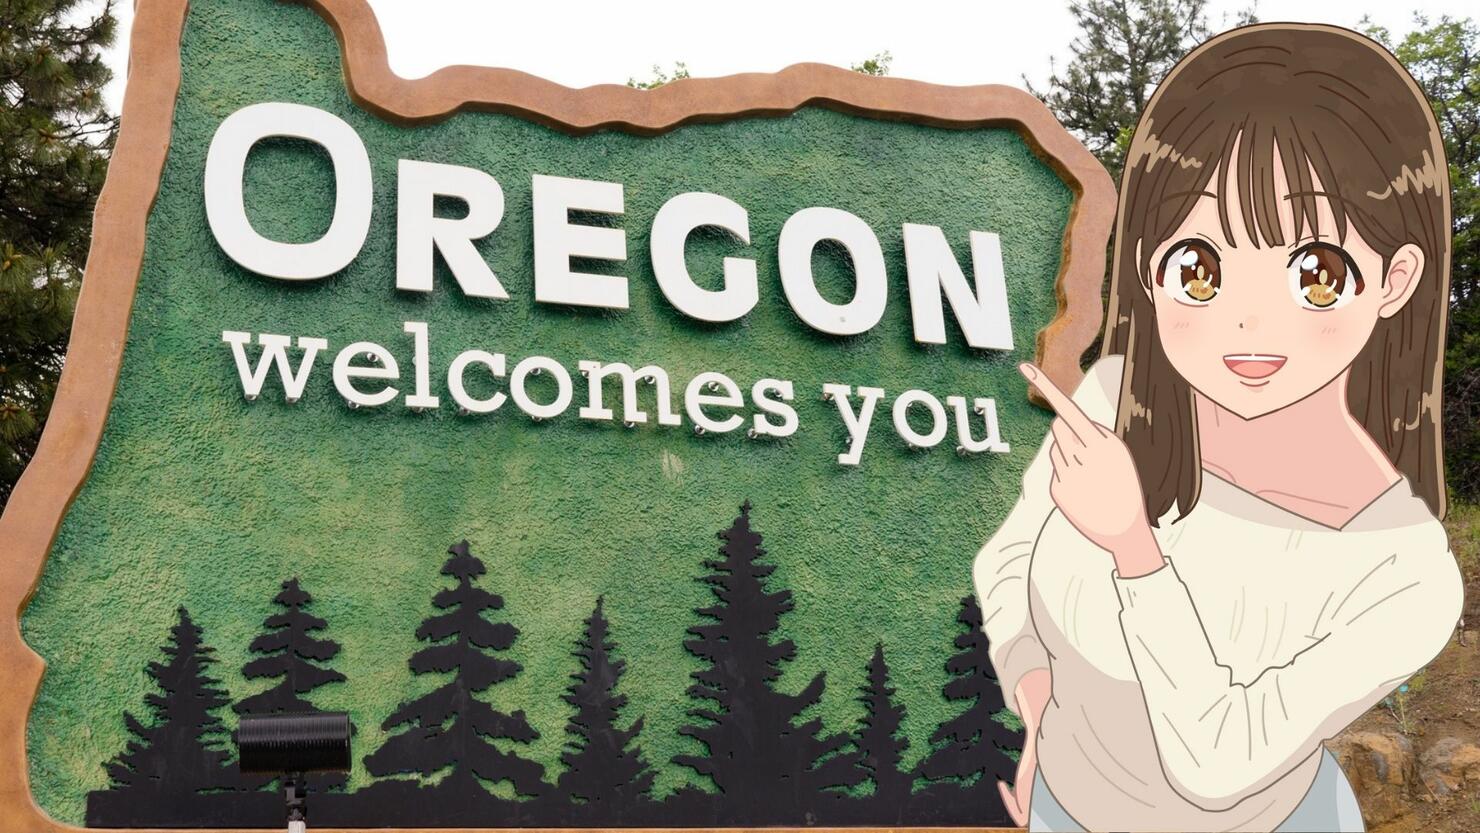 Can You Guess The Most Popular Anime In Oregon? | iHeart